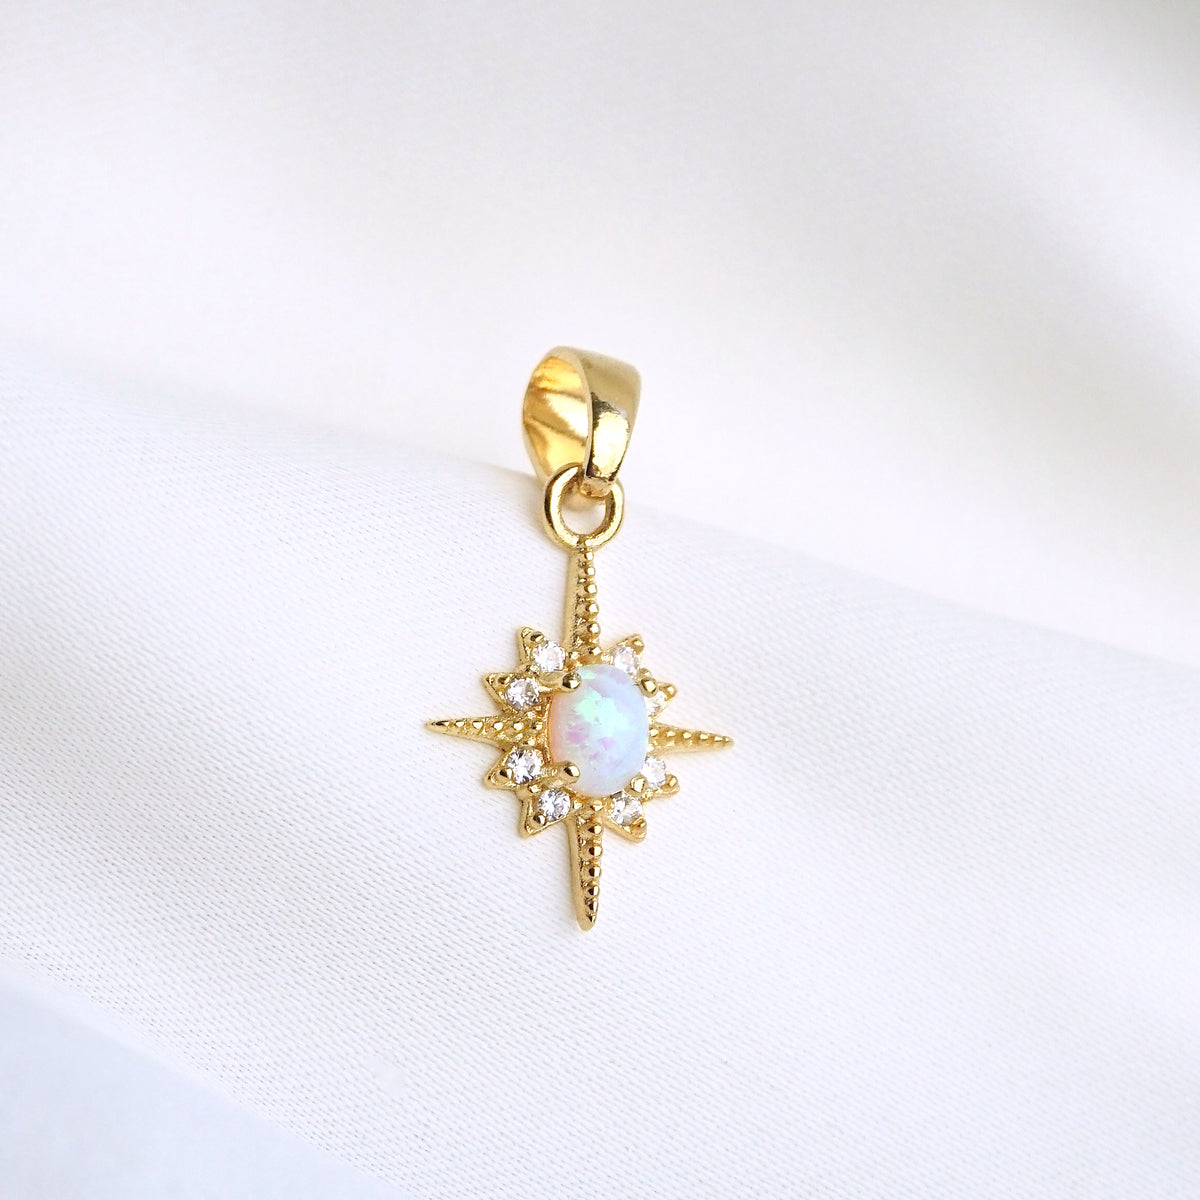 Delicate Opal North Star Necklace